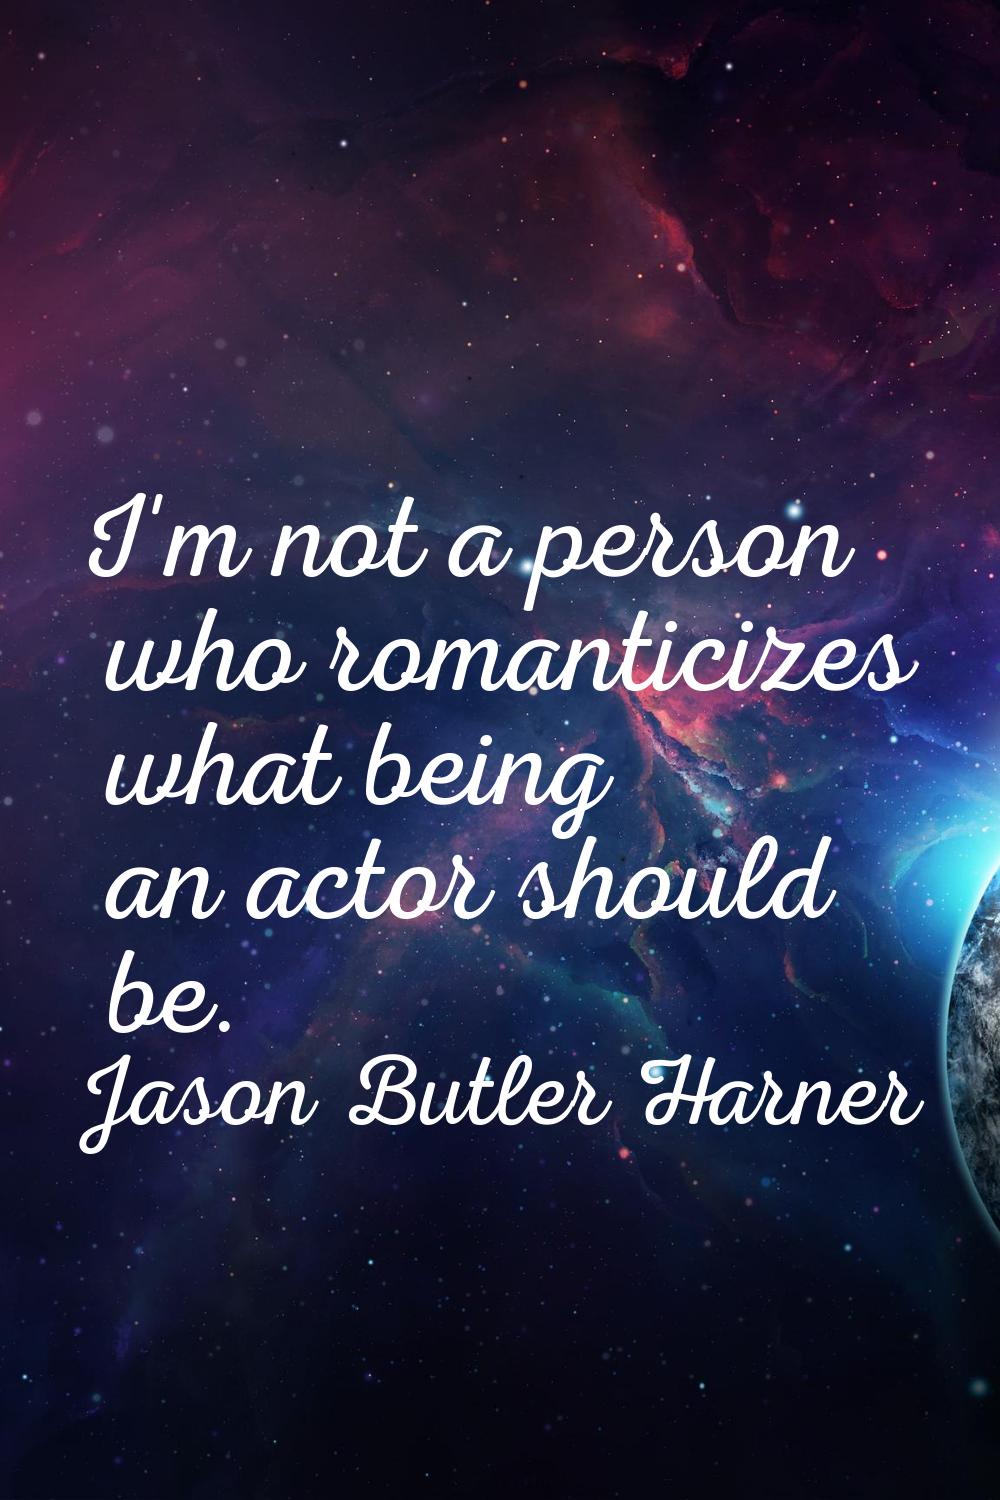 I'm not a person who romanticizes what being an actor should be.